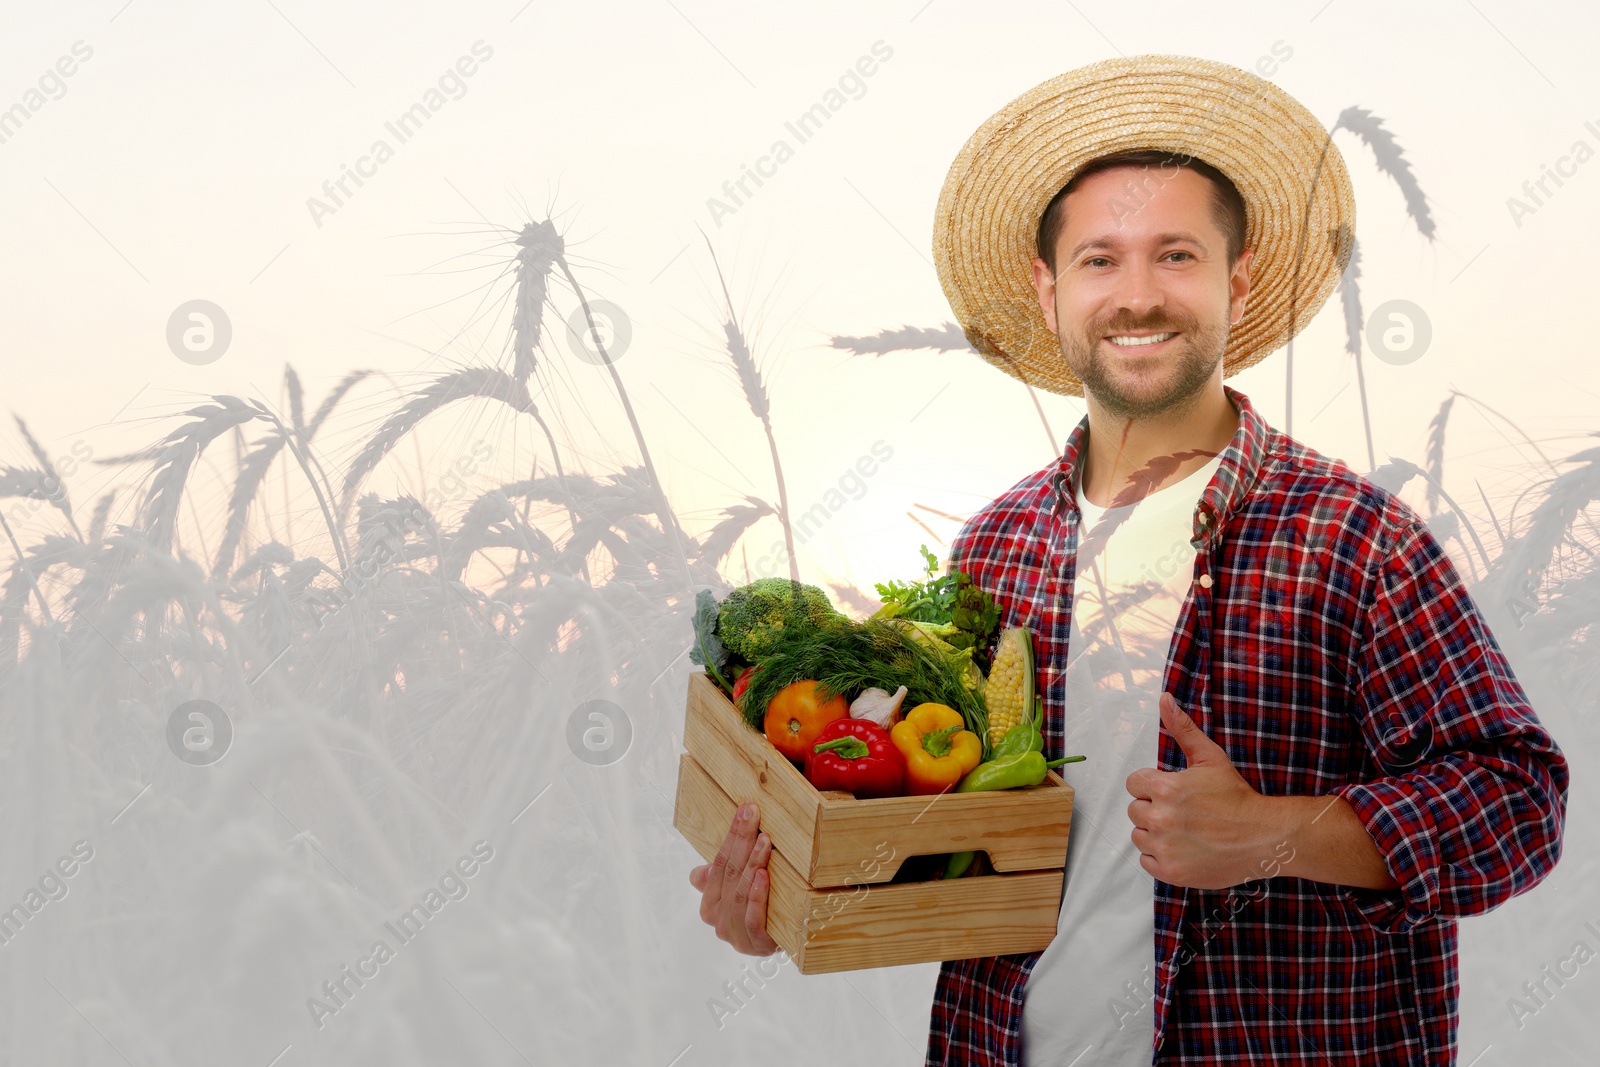 Image of Double exposure of happy farmer and wheat field. Space for text